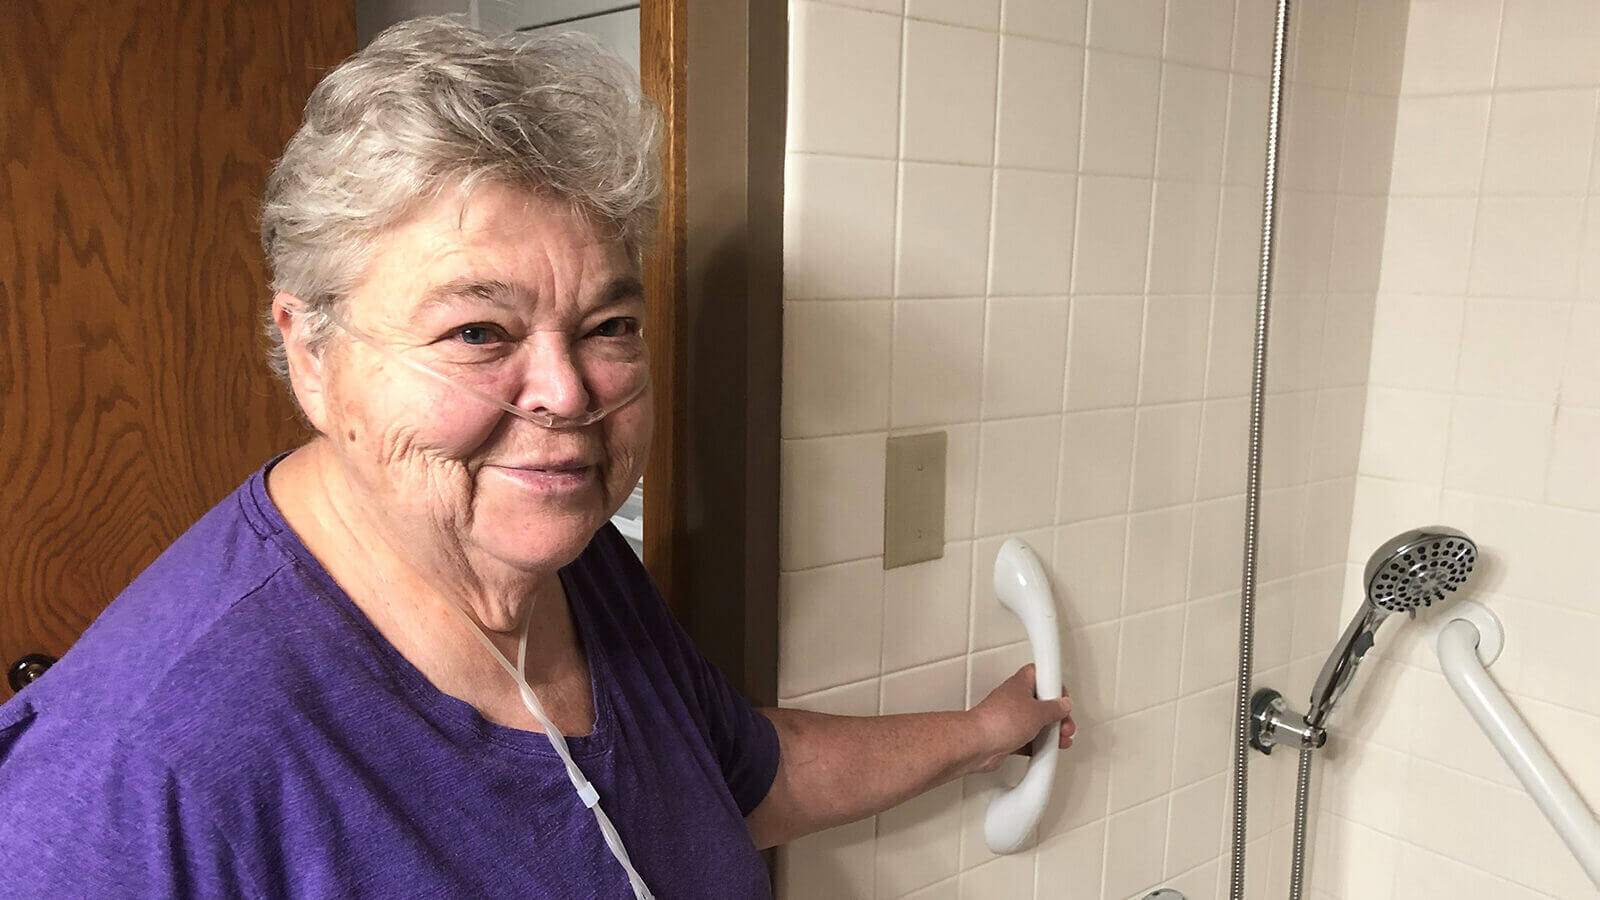 Linda smiling in a purple shirt in her bathroom, showing off her new shower grab bars and handheld shower head.